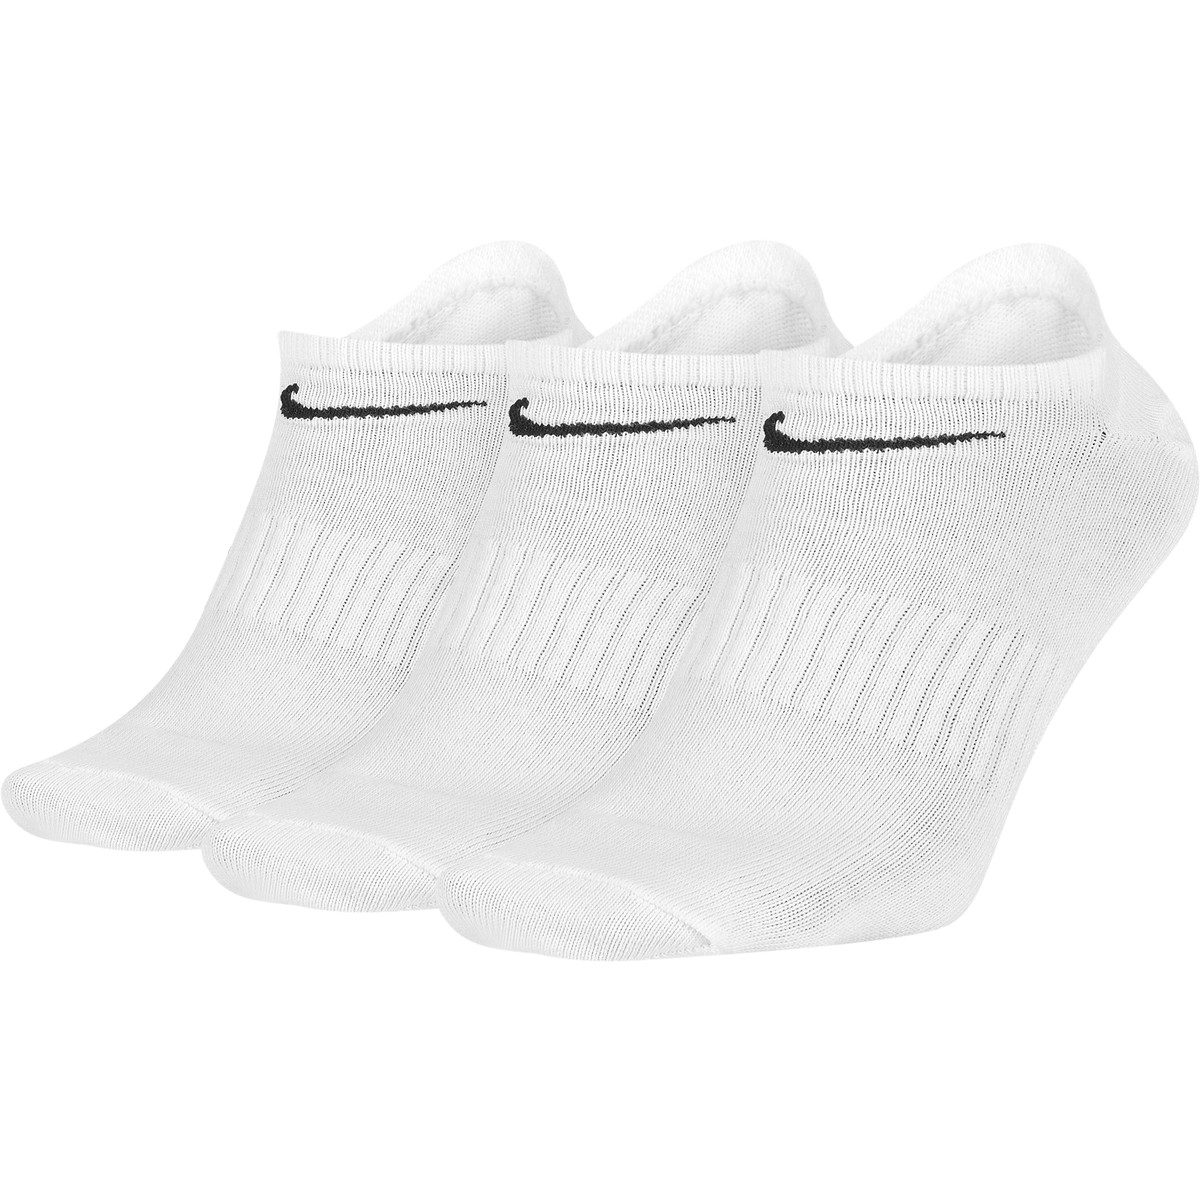 3 Paires de Chaussettes Nike Everyday Extra Basses Blanches